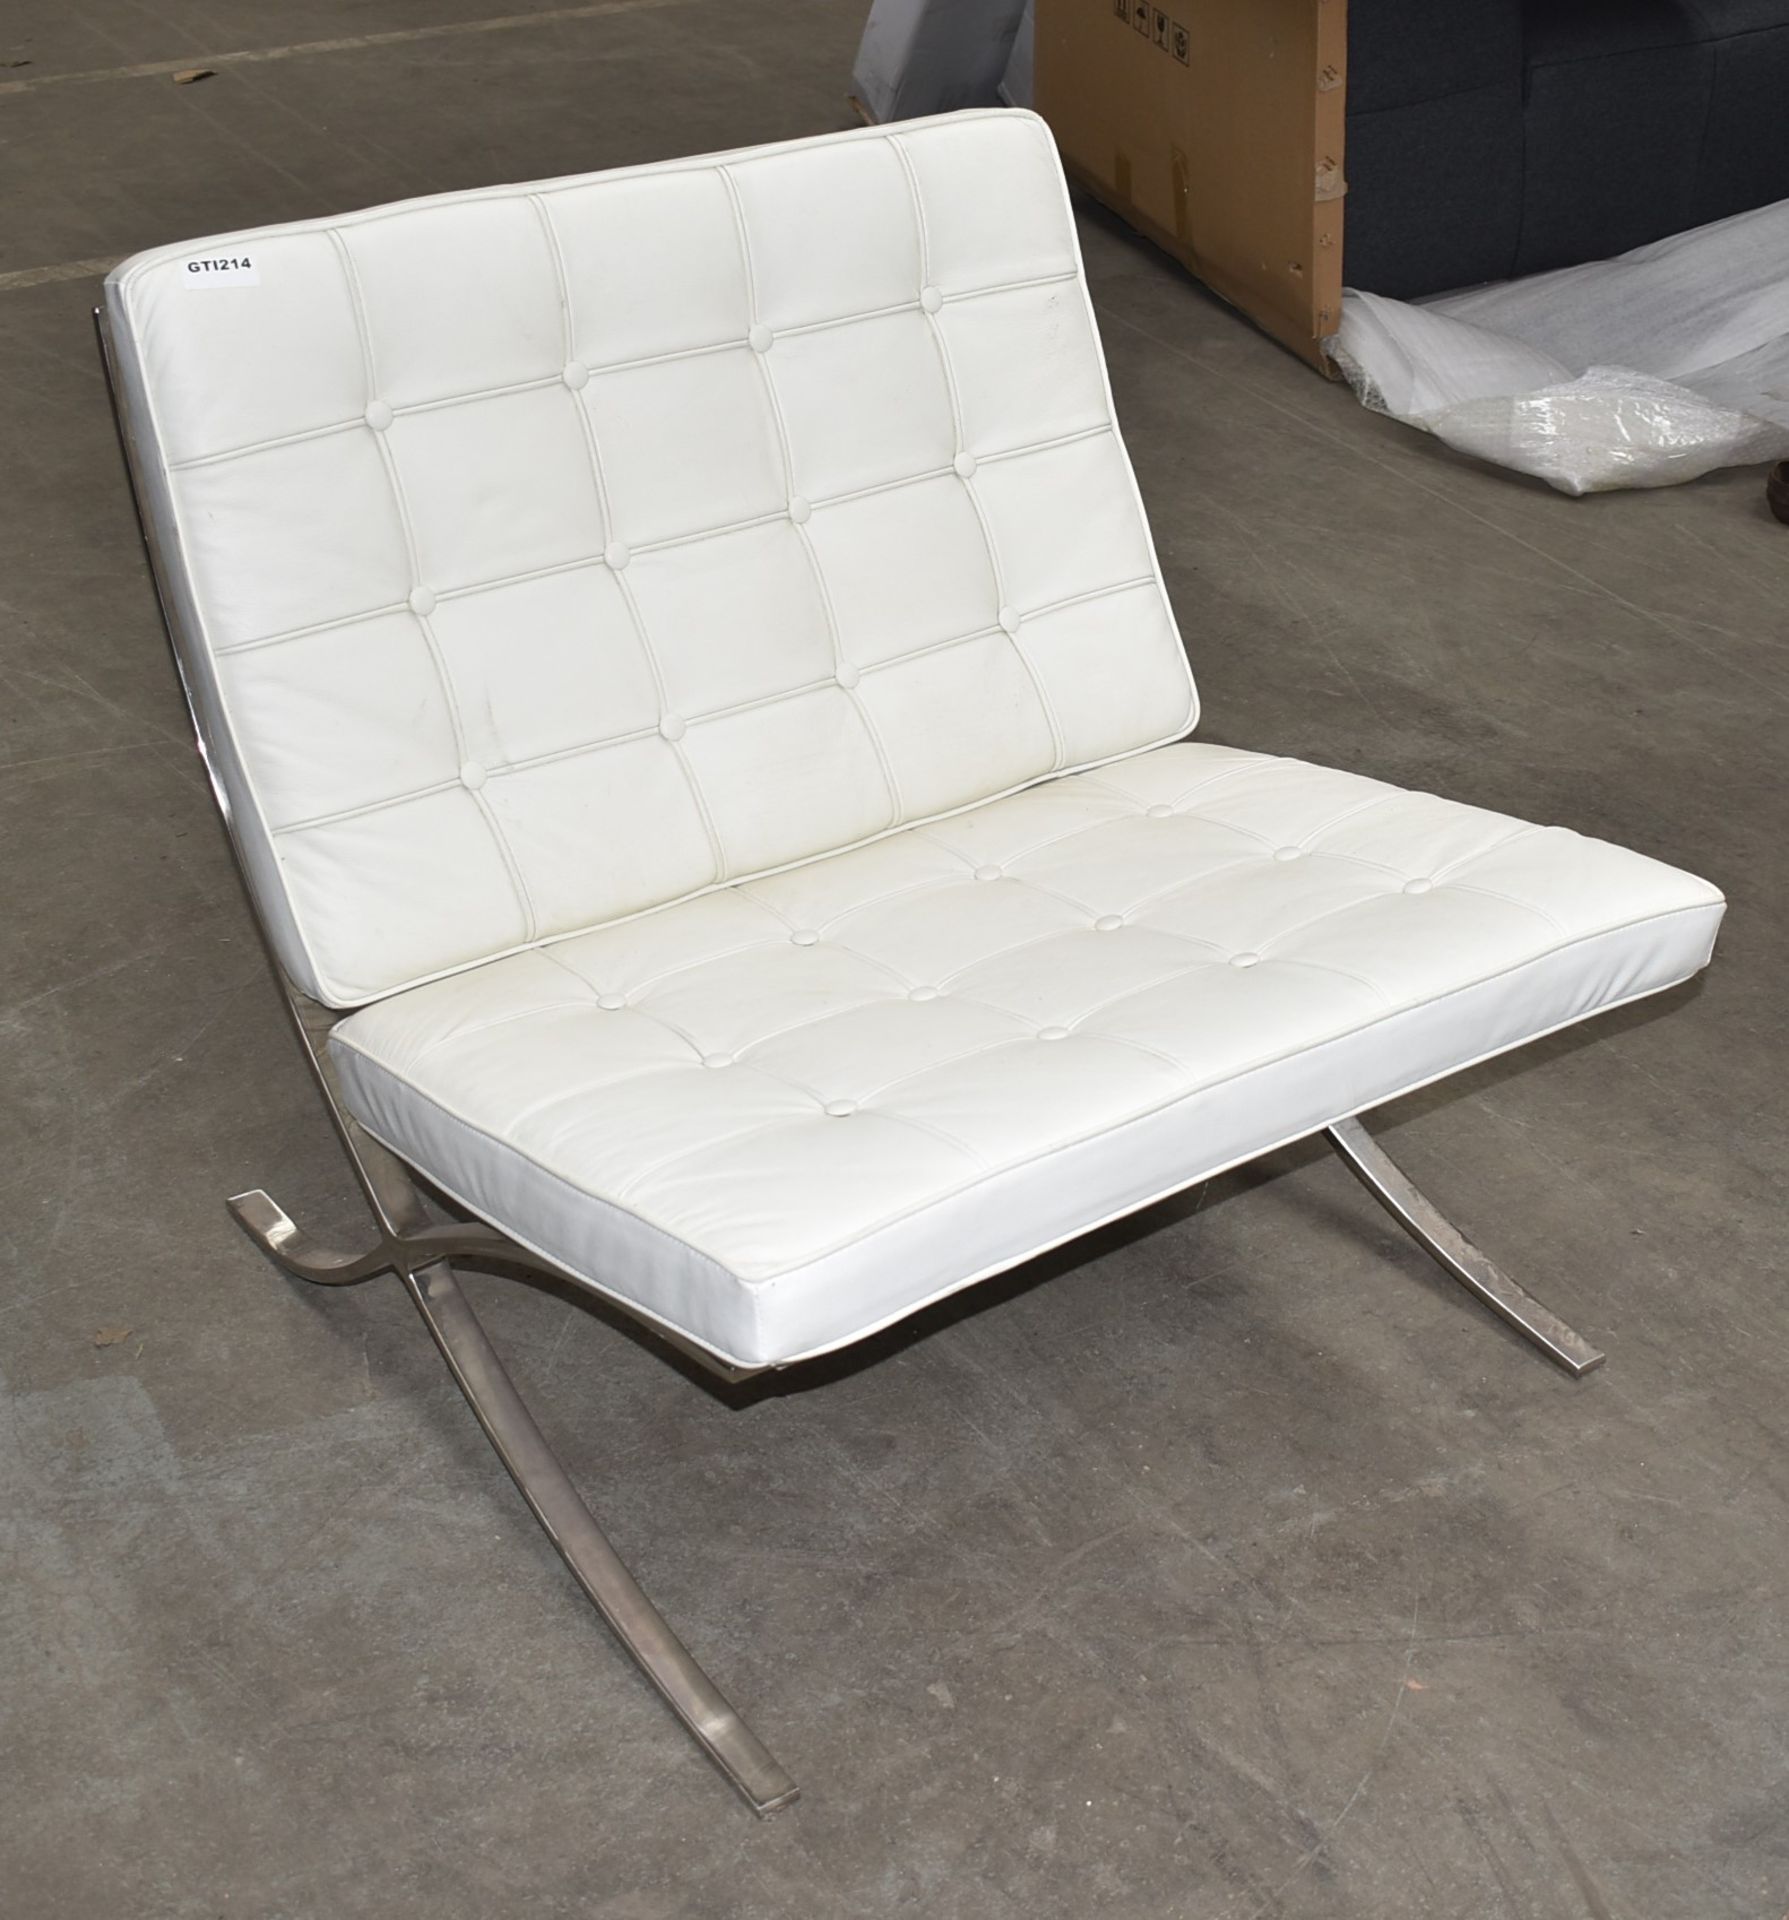 1 x Contemporary Lounge Chair With Strap Supports, Chrome Base and White Leather Studded Seat and